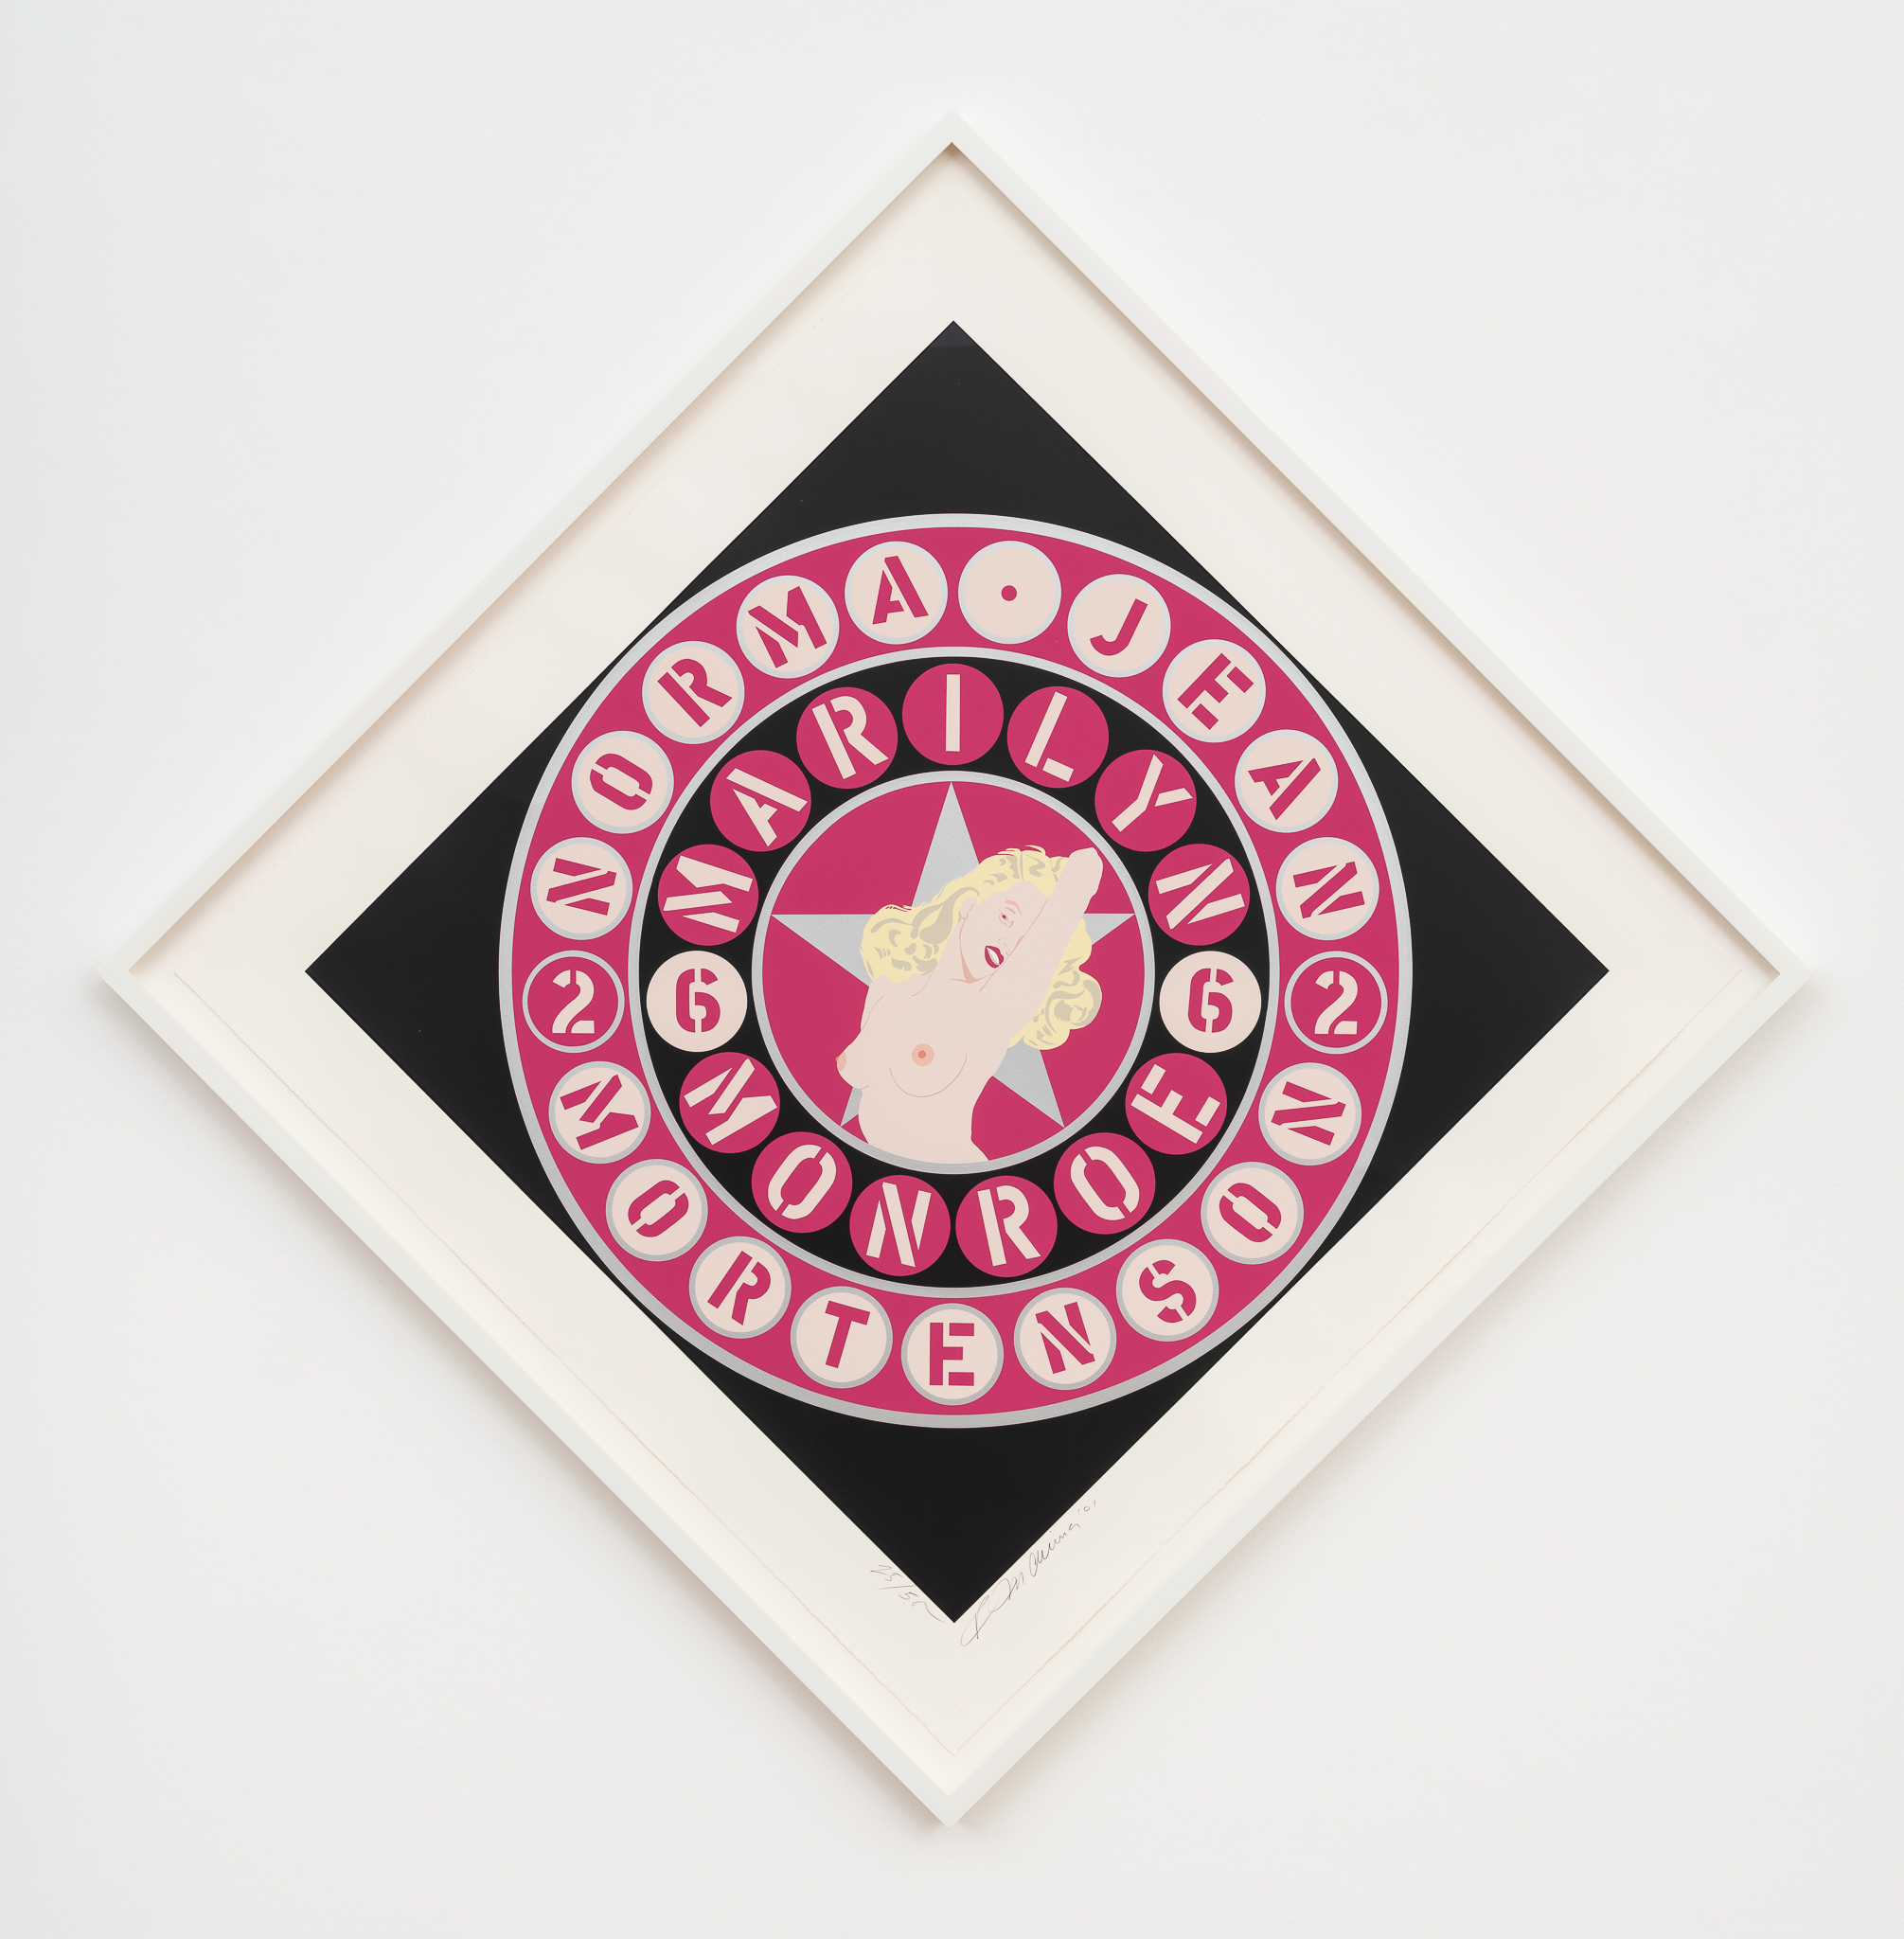 A black diamond shaped serigraph print with a pop art image of a topless Marilyn Monroe. Red circular text reads NORMAL JEAN MORTENSON, MARILYJN MONROE 26 62